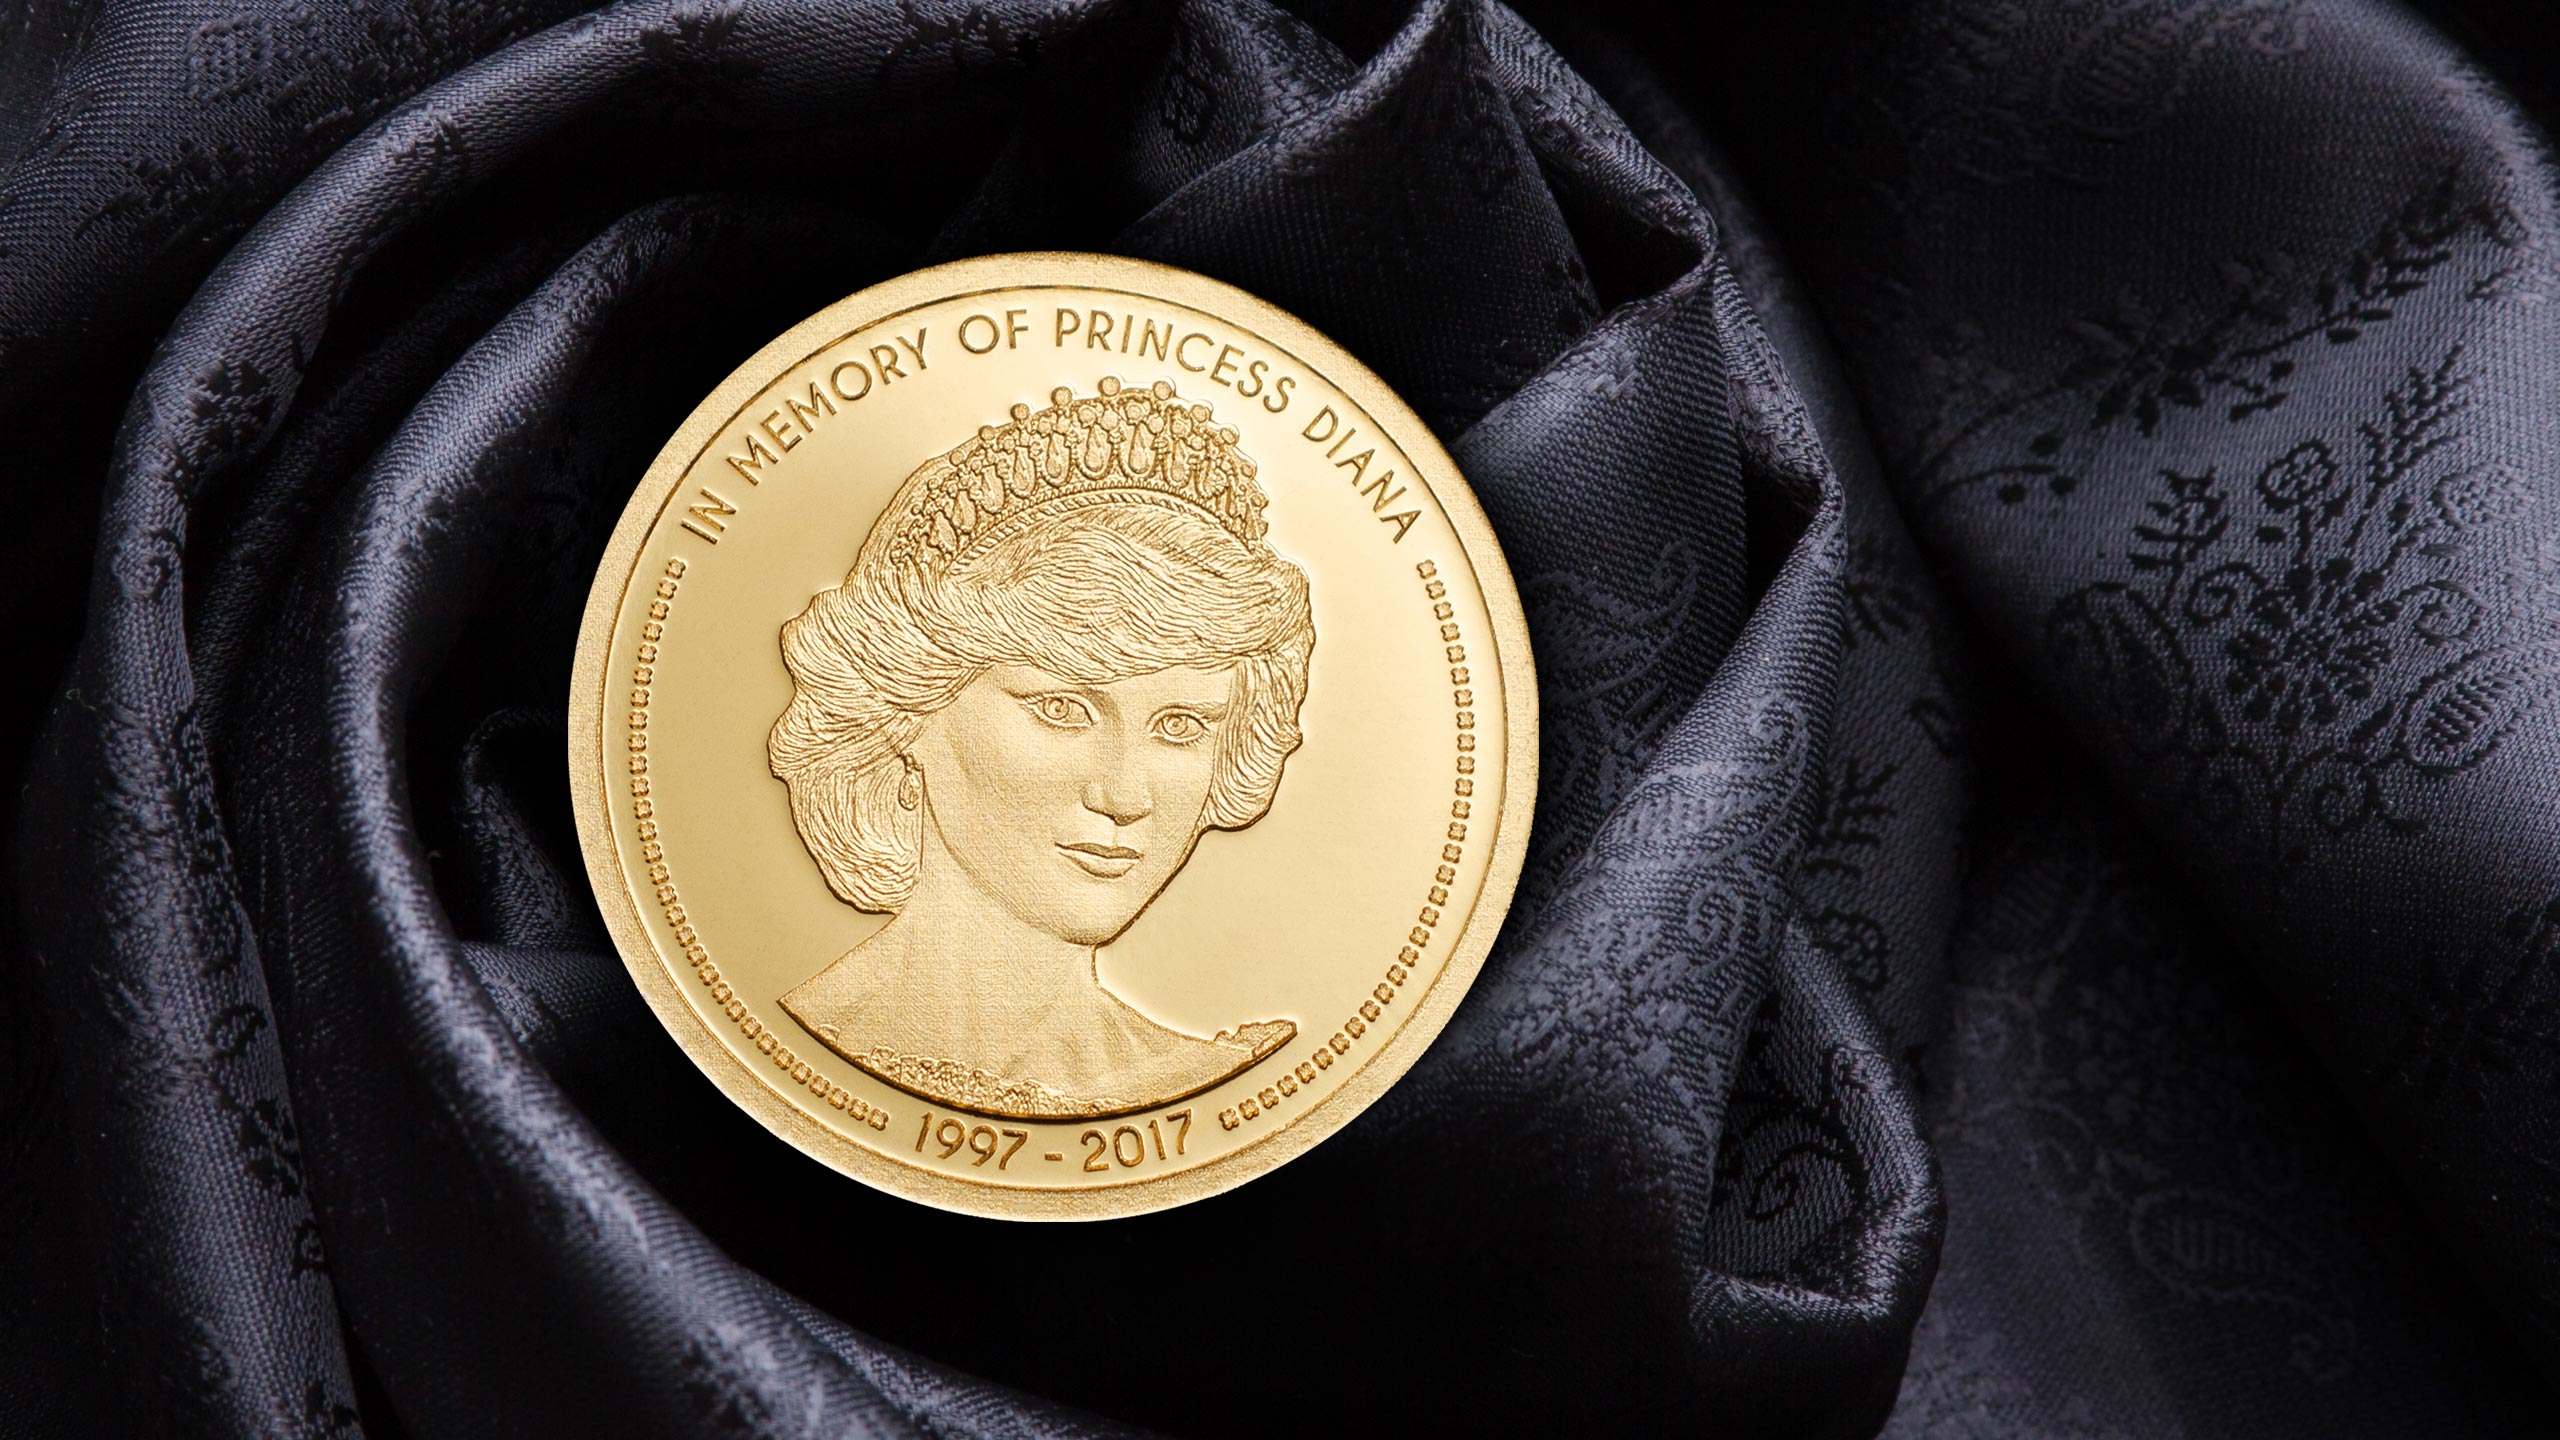 Big Gold Minting coin in memory of princess diana